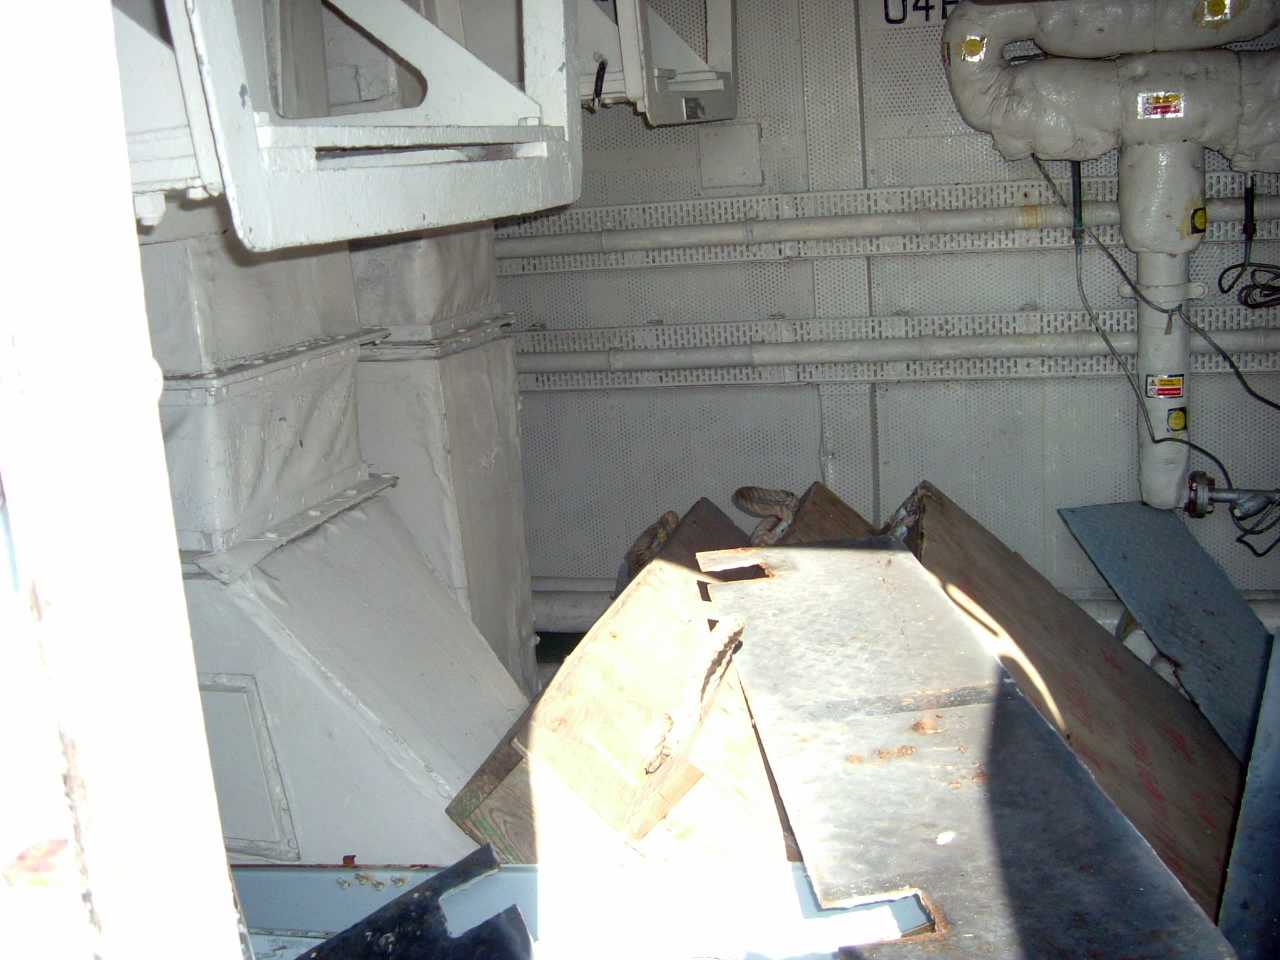 The HMS Intrepid Locker where Neil Rested between Attacks